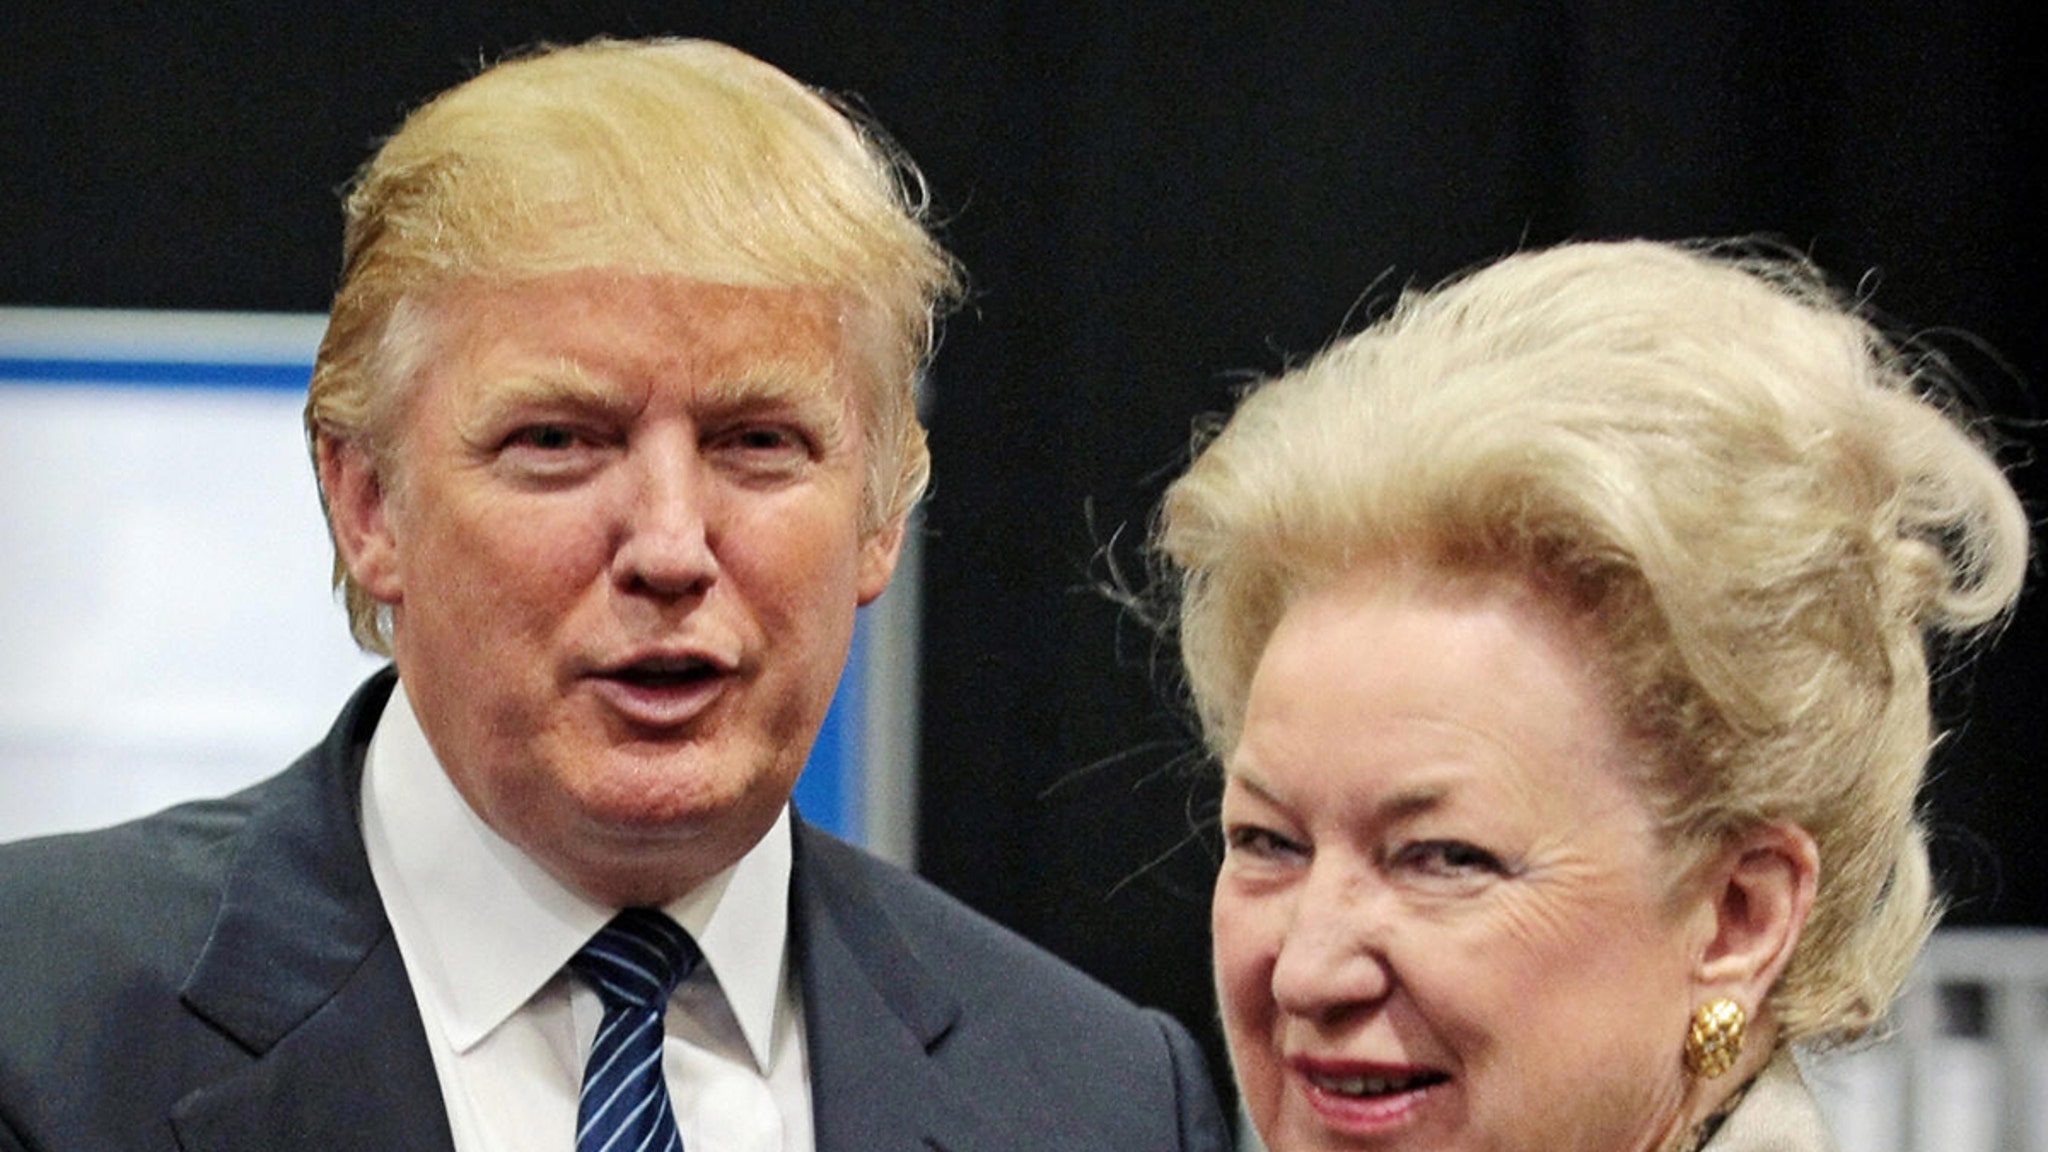 Donald Trump's Sister Says He's a Liar and a Cheat in Secretly Recorded Audio